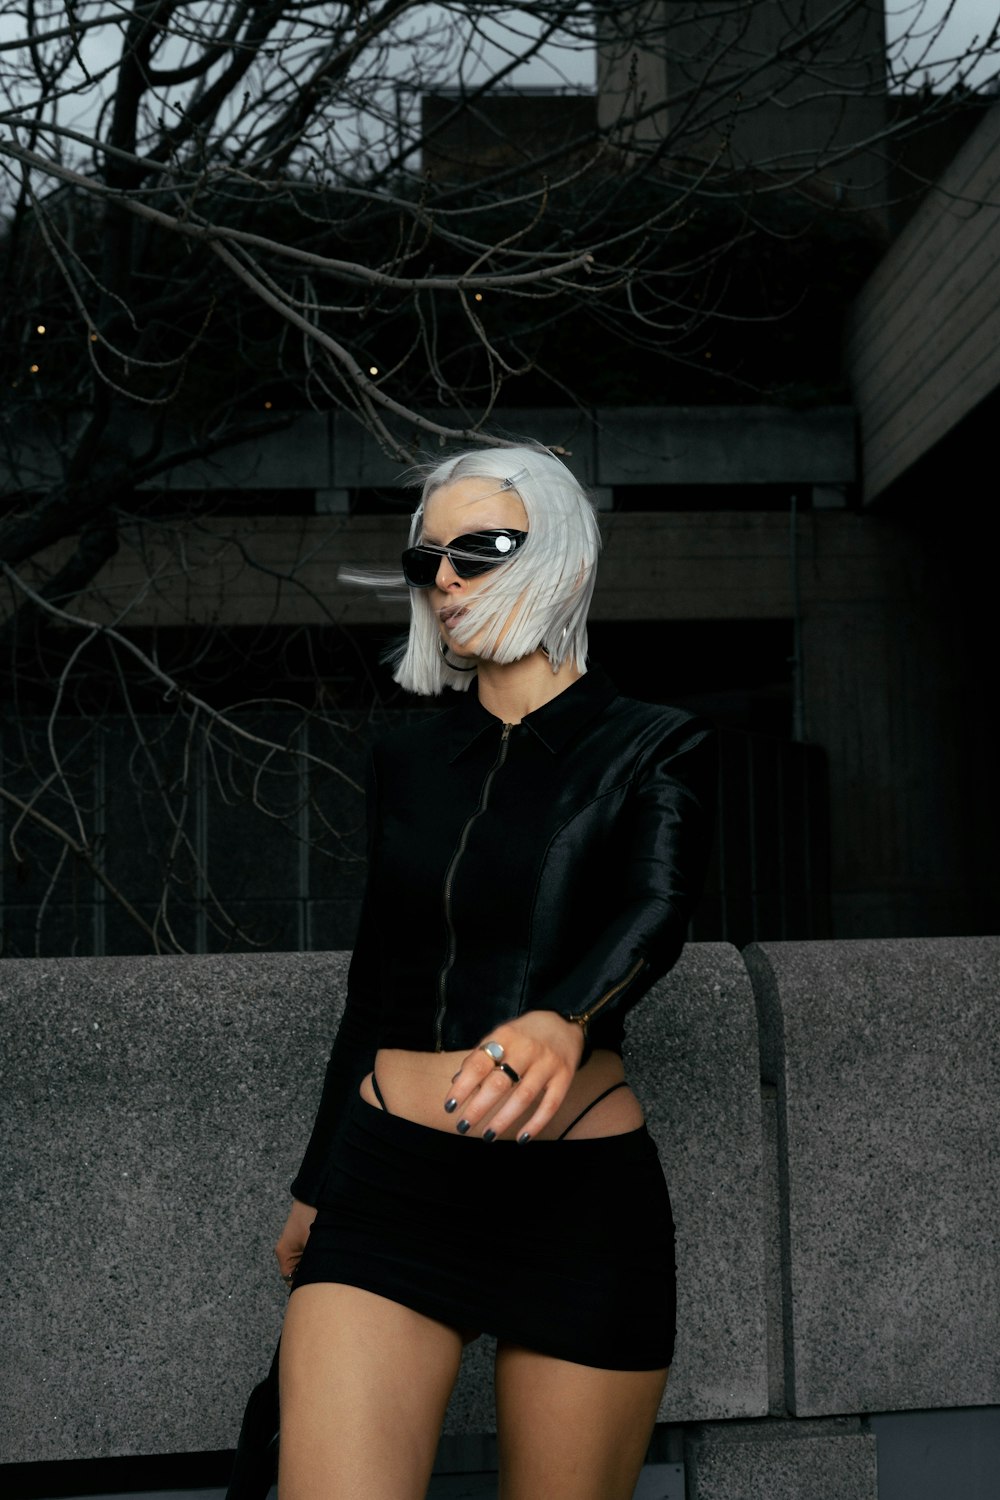 a woman with white hair wearing a black outfit